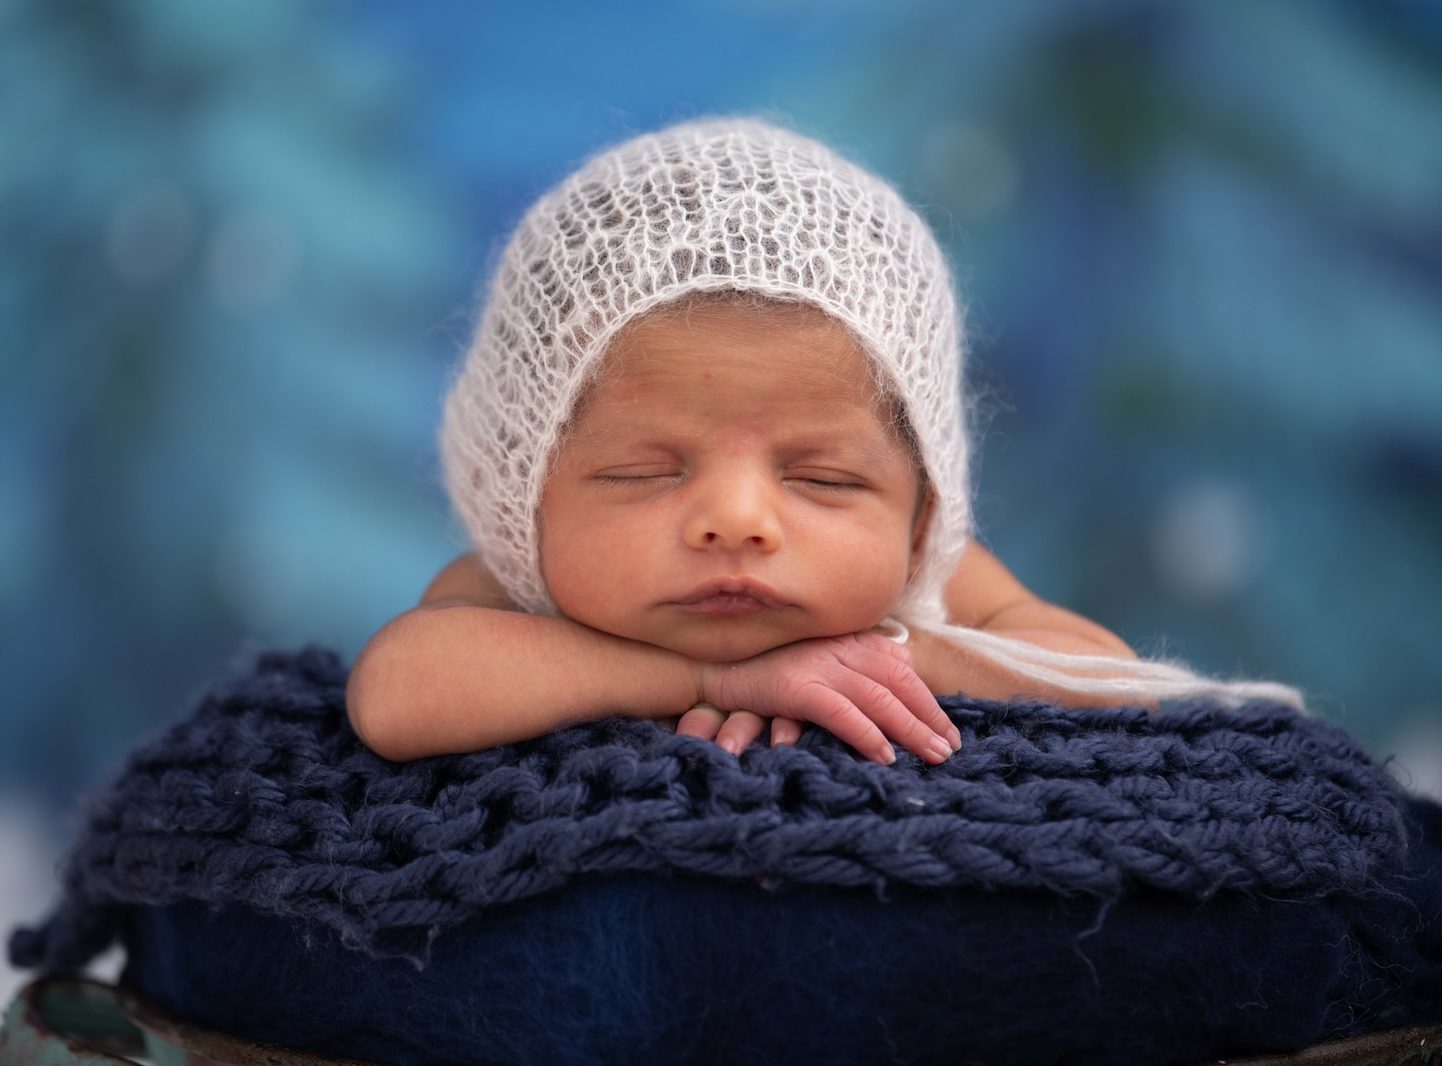 baby in white knit cap